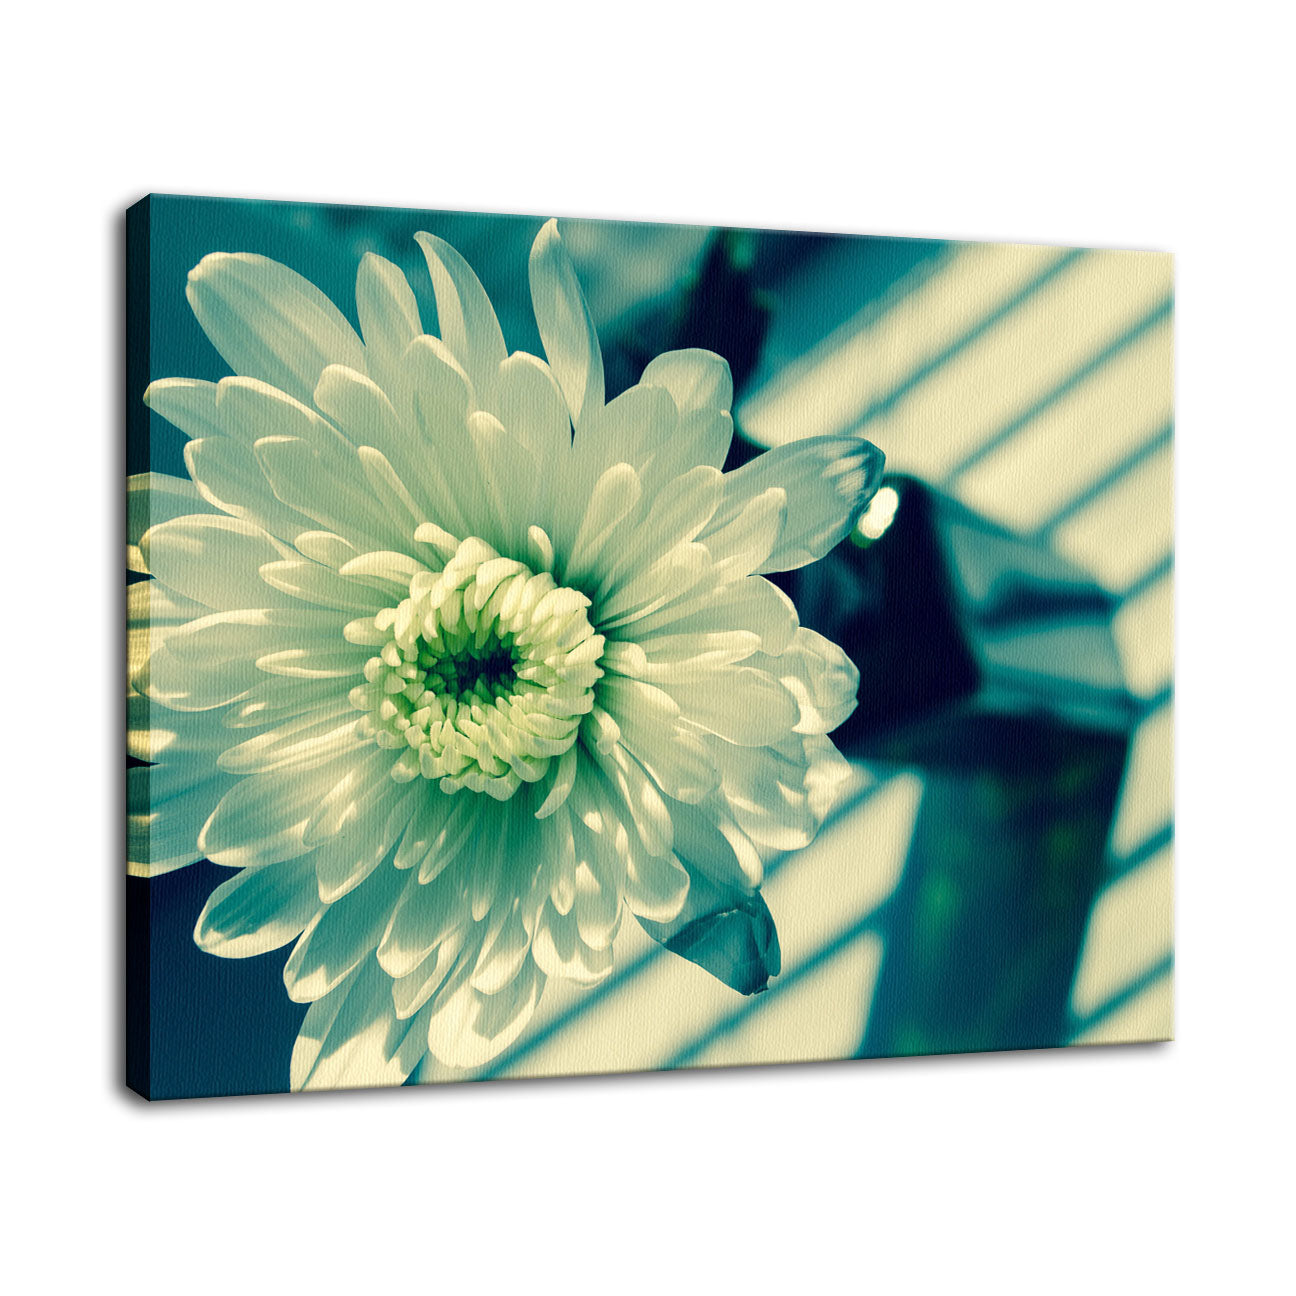 Melancholy Flower Nature / Floral Photo Fine Art Canvas Wall Art Prints  - PIPAFINEART